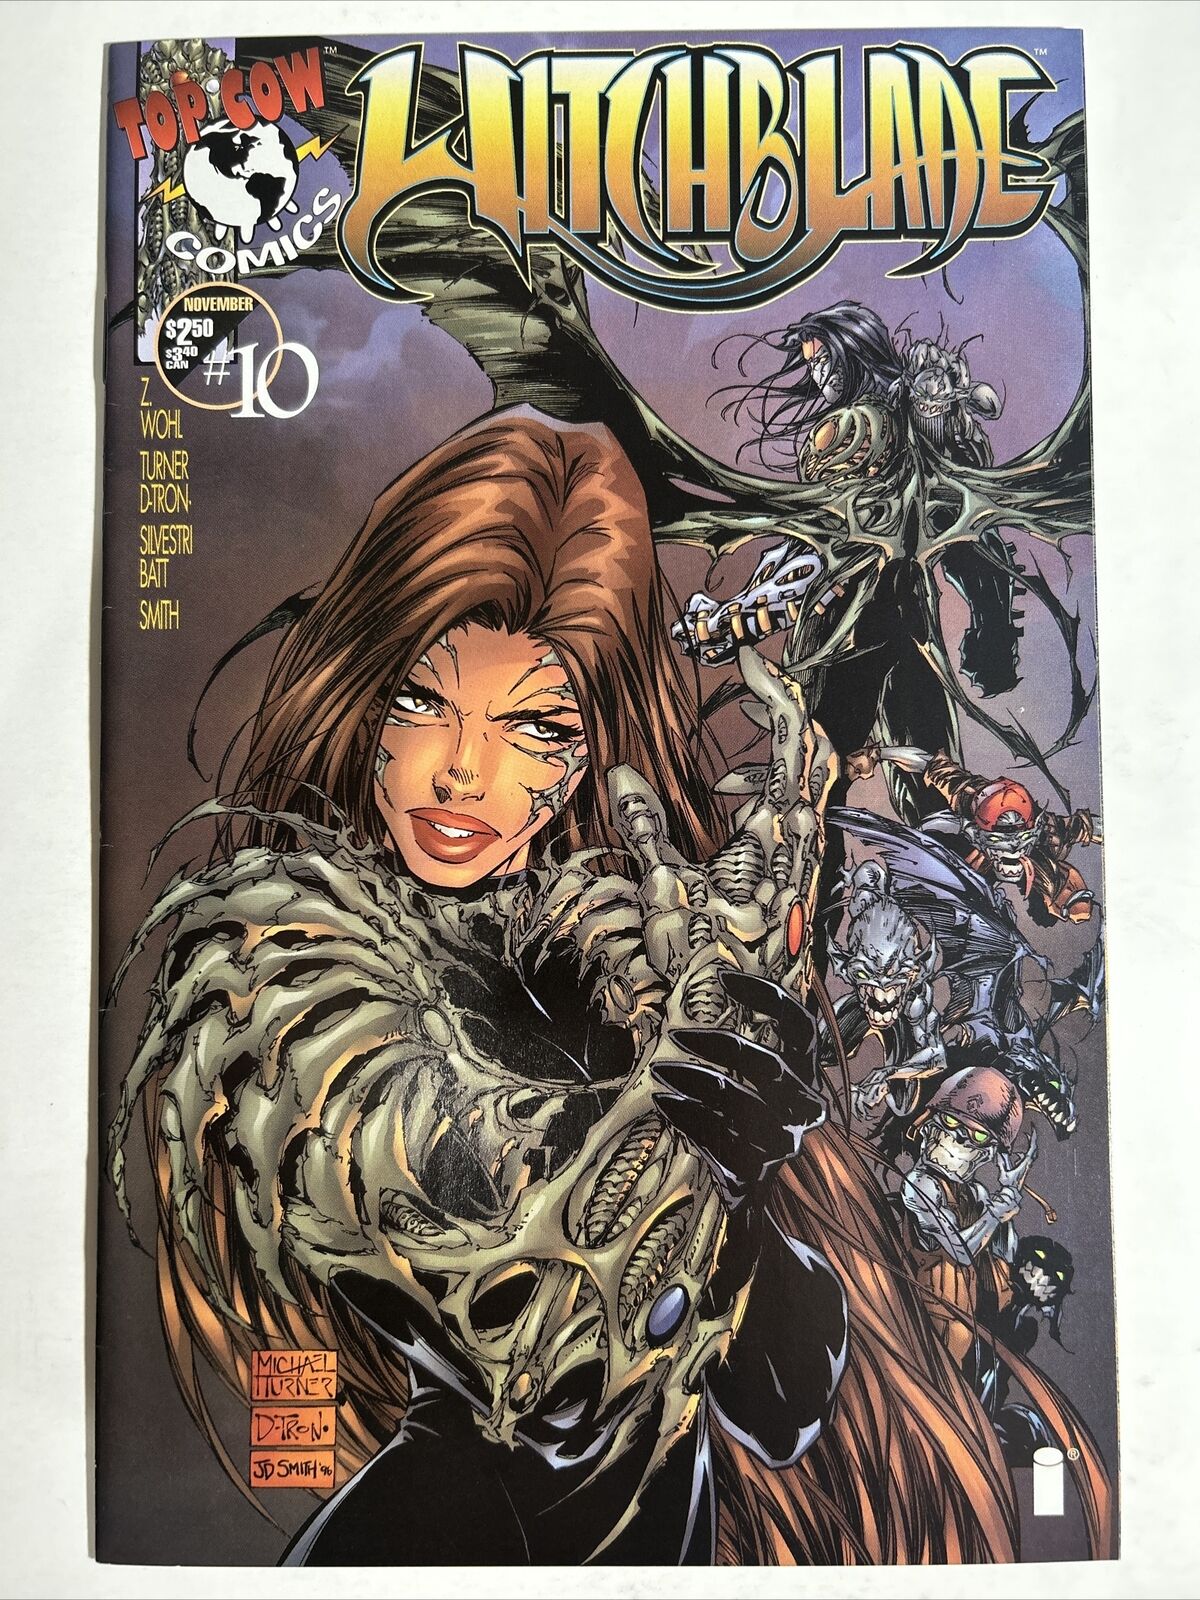 Witchblade #10 1st Appearance of Darkness, Michael Turner (Top Cow Comics)